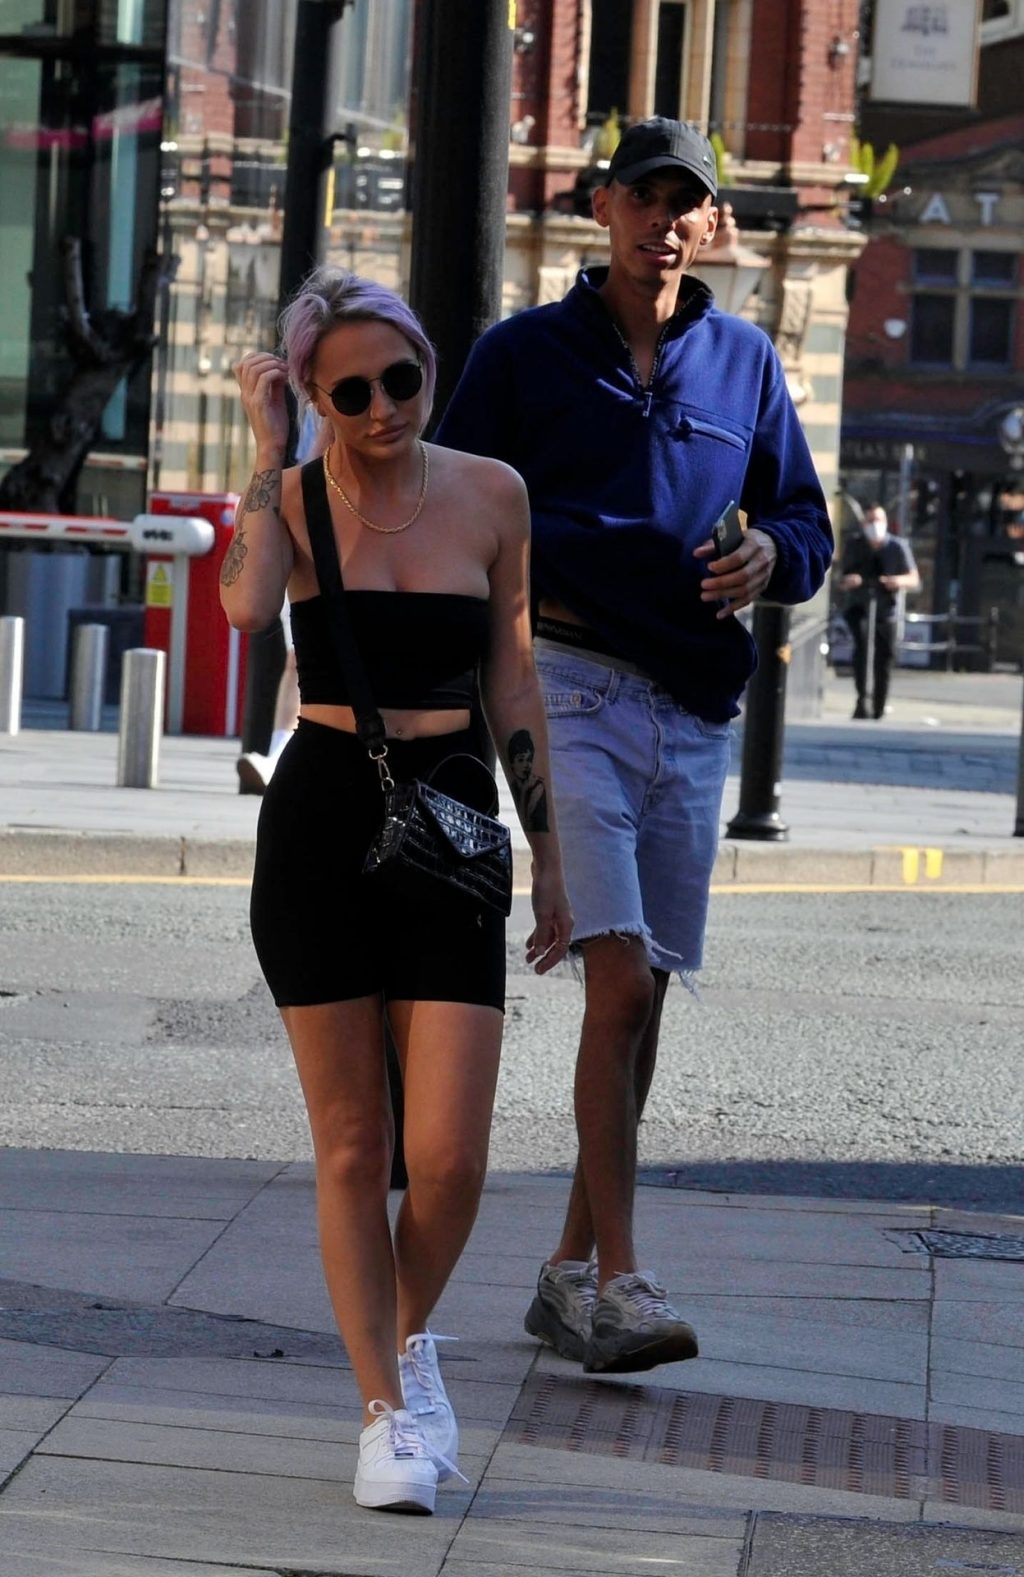 Leonie McSorley Is Pictured Out in Manchester (7 Photos)